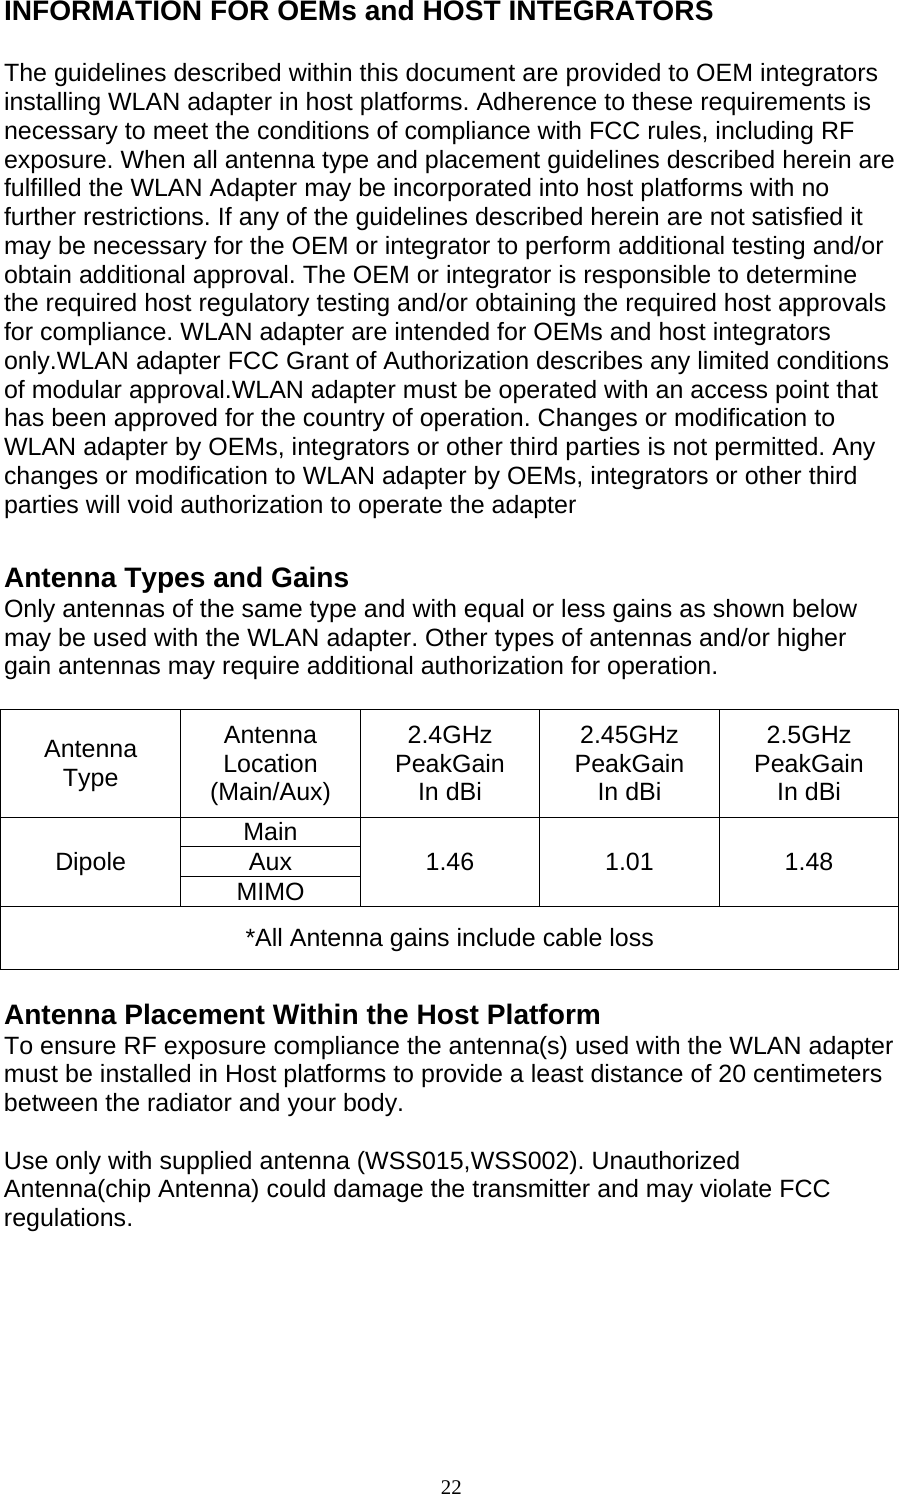 22  INFORMATION FOR OEMs and HOST INTEGRATORS  The guidelines described within this document are provided to OEM integrators installing WLAN adapter in host platforms. Adherence to these requirements is necessary to meet the conditions of compliance with FCC rules, including RF exposure. When all antenna type and placement guidelines described herein are fulfilled the WLAN Adapter may be incorporated into host platforms with no further restrictions. If any of the guidelines described herein are not satisfied it may be necessary for the OEM or integrator to perform additional testing and/or obtain additional approval. The OEM or integrator is responsible to determine the required host regulatory testing and/or obtaining the required host approvals for compliance. WLAN adapter are intended for OEMs and host integrators only.WLAN adapter FCC Grant of Authorization describes any limited conditions of modular approval.WLAN adapter must be operated with an access point that has been approved for the country of operation. Changes or modification to WLAN adapter by OEMs, integrators or other third parties is not permitted. Any changes or modification to WLAN adapter by OEMs, integrators or other third parties will void authorization to operate the adapter  Antenna Types and Gains Only antennas of the same type and with equal or less gains as shown below may be used with the WLAN adapter. Other types of antennas and/or higher gain antennas may require additional authorization for operation.  Antenna Type Antenna Location (Main/Aux) 2.4GHz PeakGain In dBi 2.45GHz PeakGain In dBi 2.5GHz PeakGain In dBi Dipole  Main  1.46 1.01 1.48 Aux MIMO *All Antenna gains include cable loss  Antenna Placement Within the Host Platform To ensure RF exposure compliance the antenna(s) used with the WLAN adapter must be installed in Host platforms to provide a least distance of 20 centimeters between the radiator and your body.  Use only with supplied antenna (WSS015,WSS002). Unauthorized Antenna(chip Antenna) could damage the transmitter and may violate FCC regulations.      